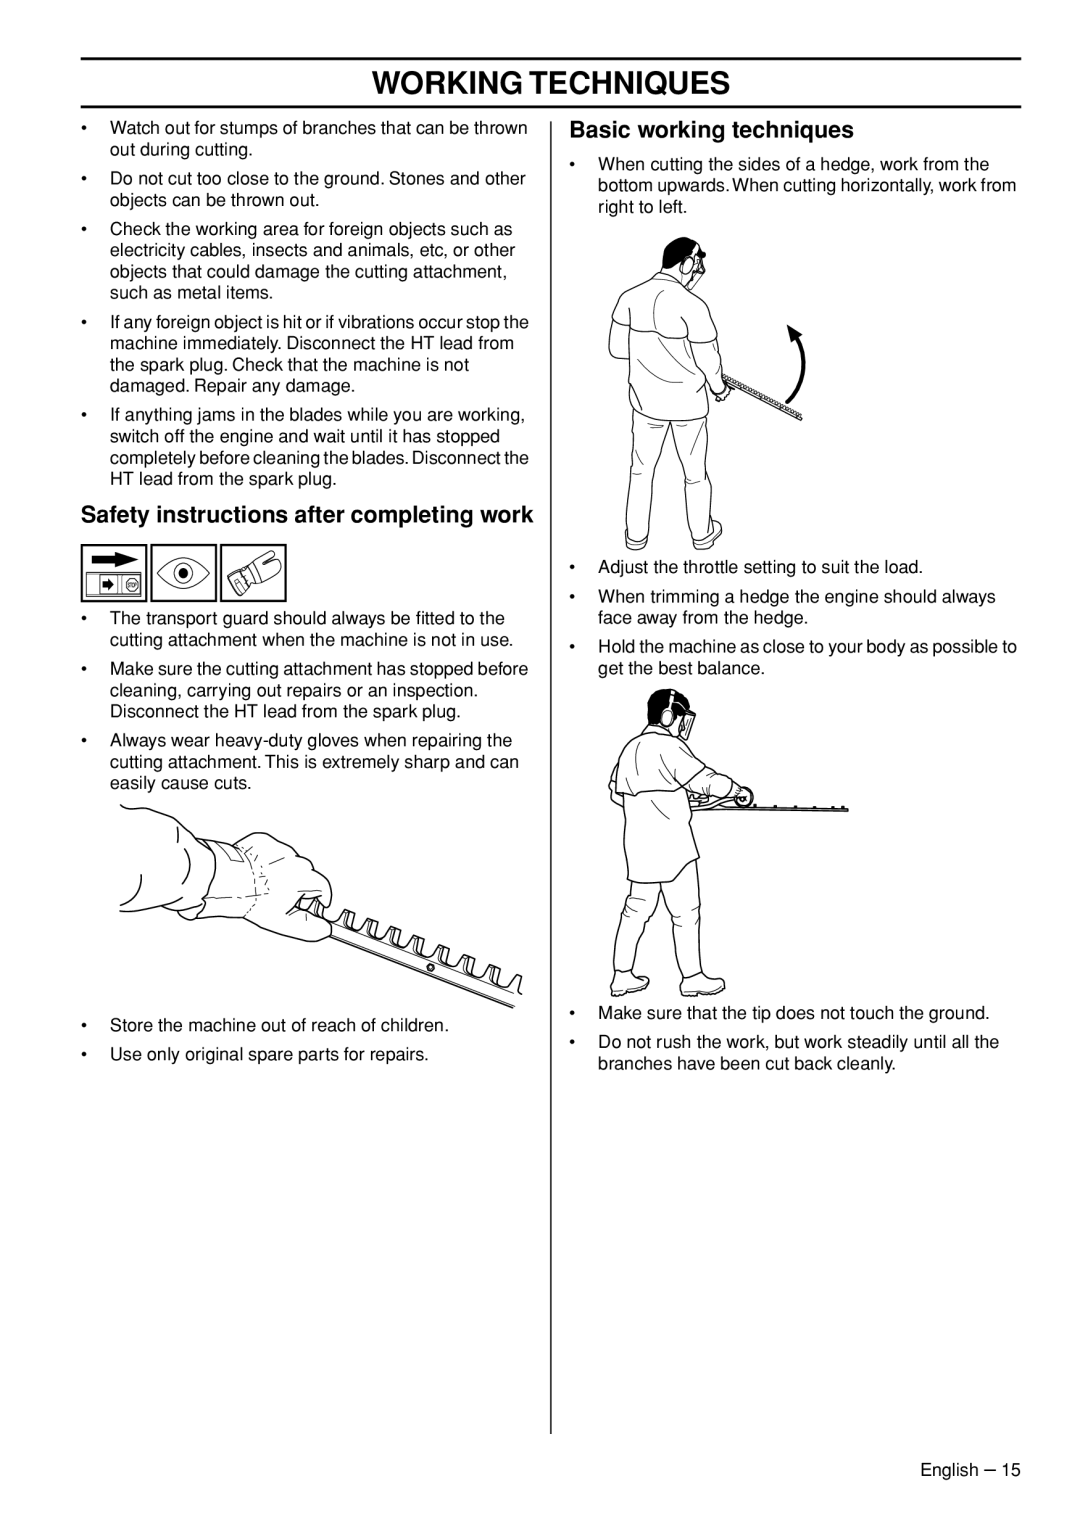 Husqvarna 325HS99X-series manual Safety instructions after completing work, Basic working techniques, Working Techniques 